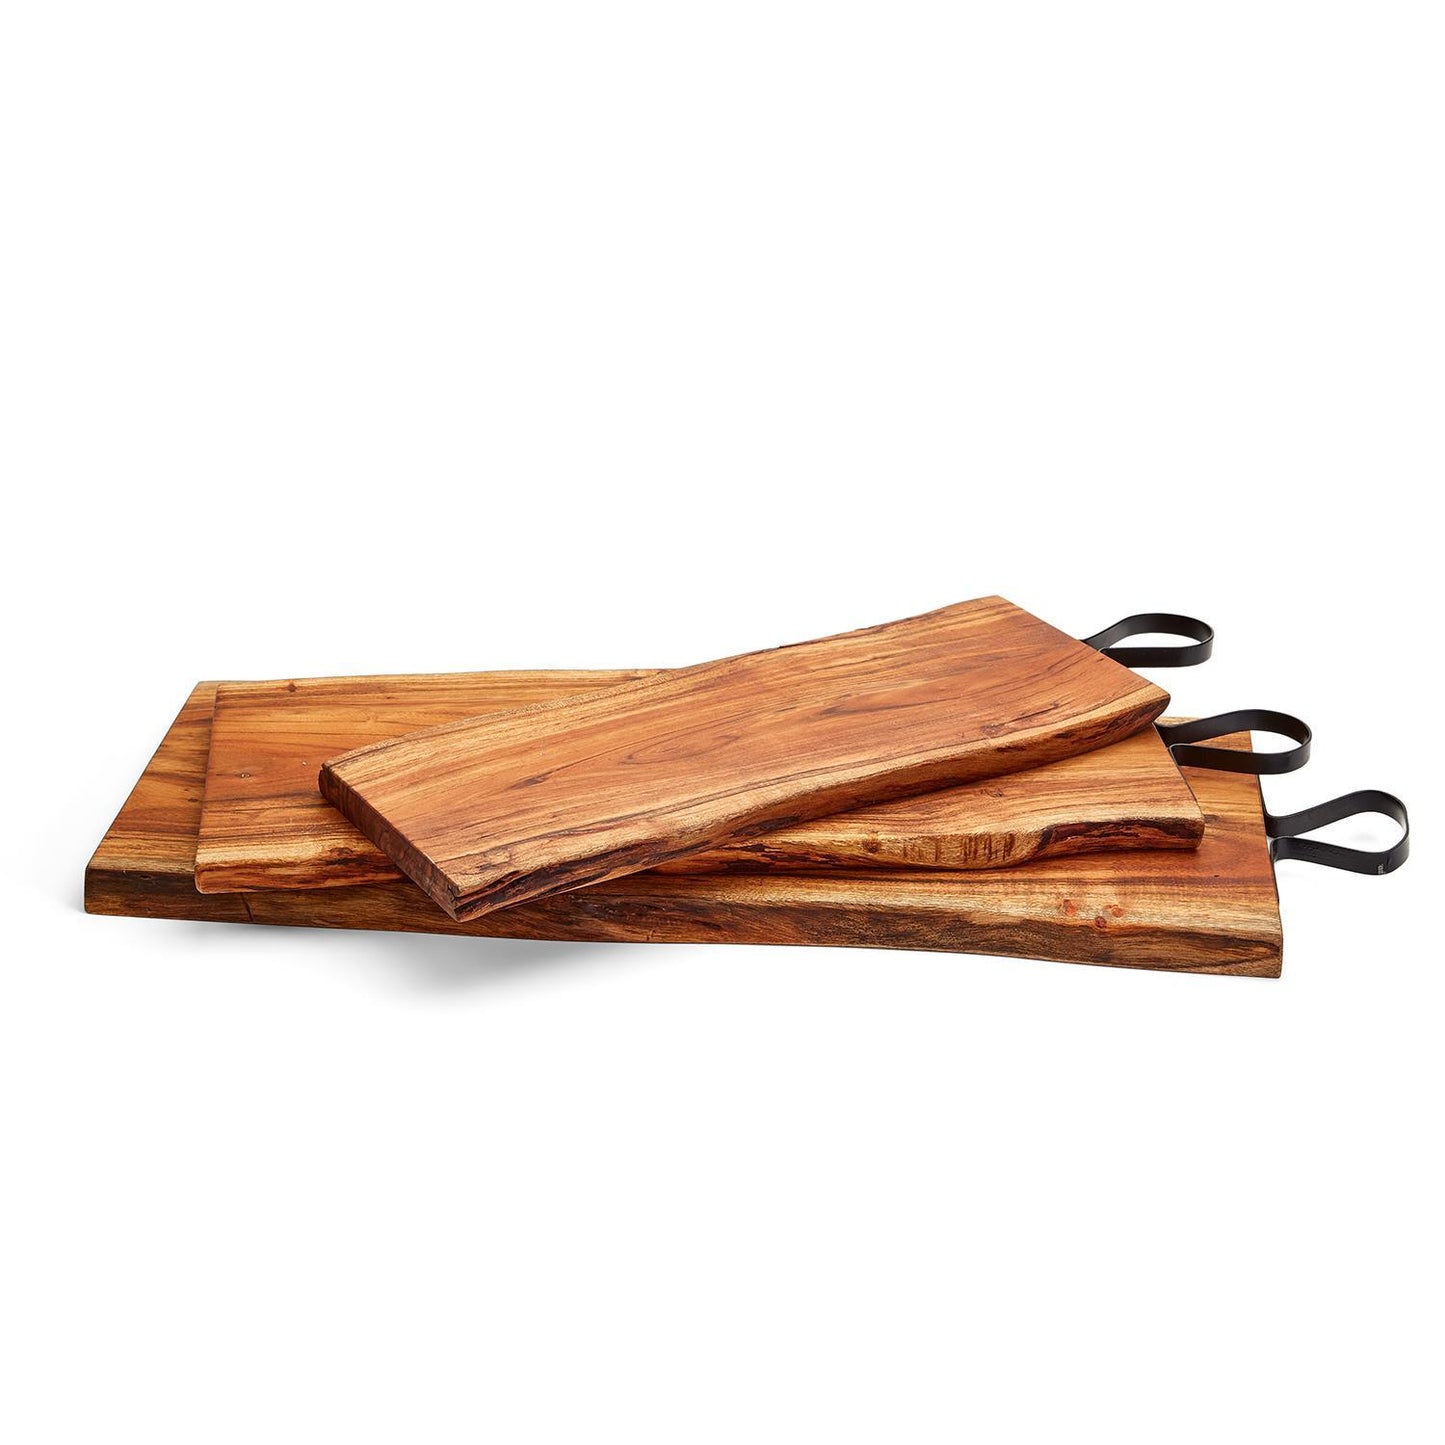 Serving Boards with Iron Handles